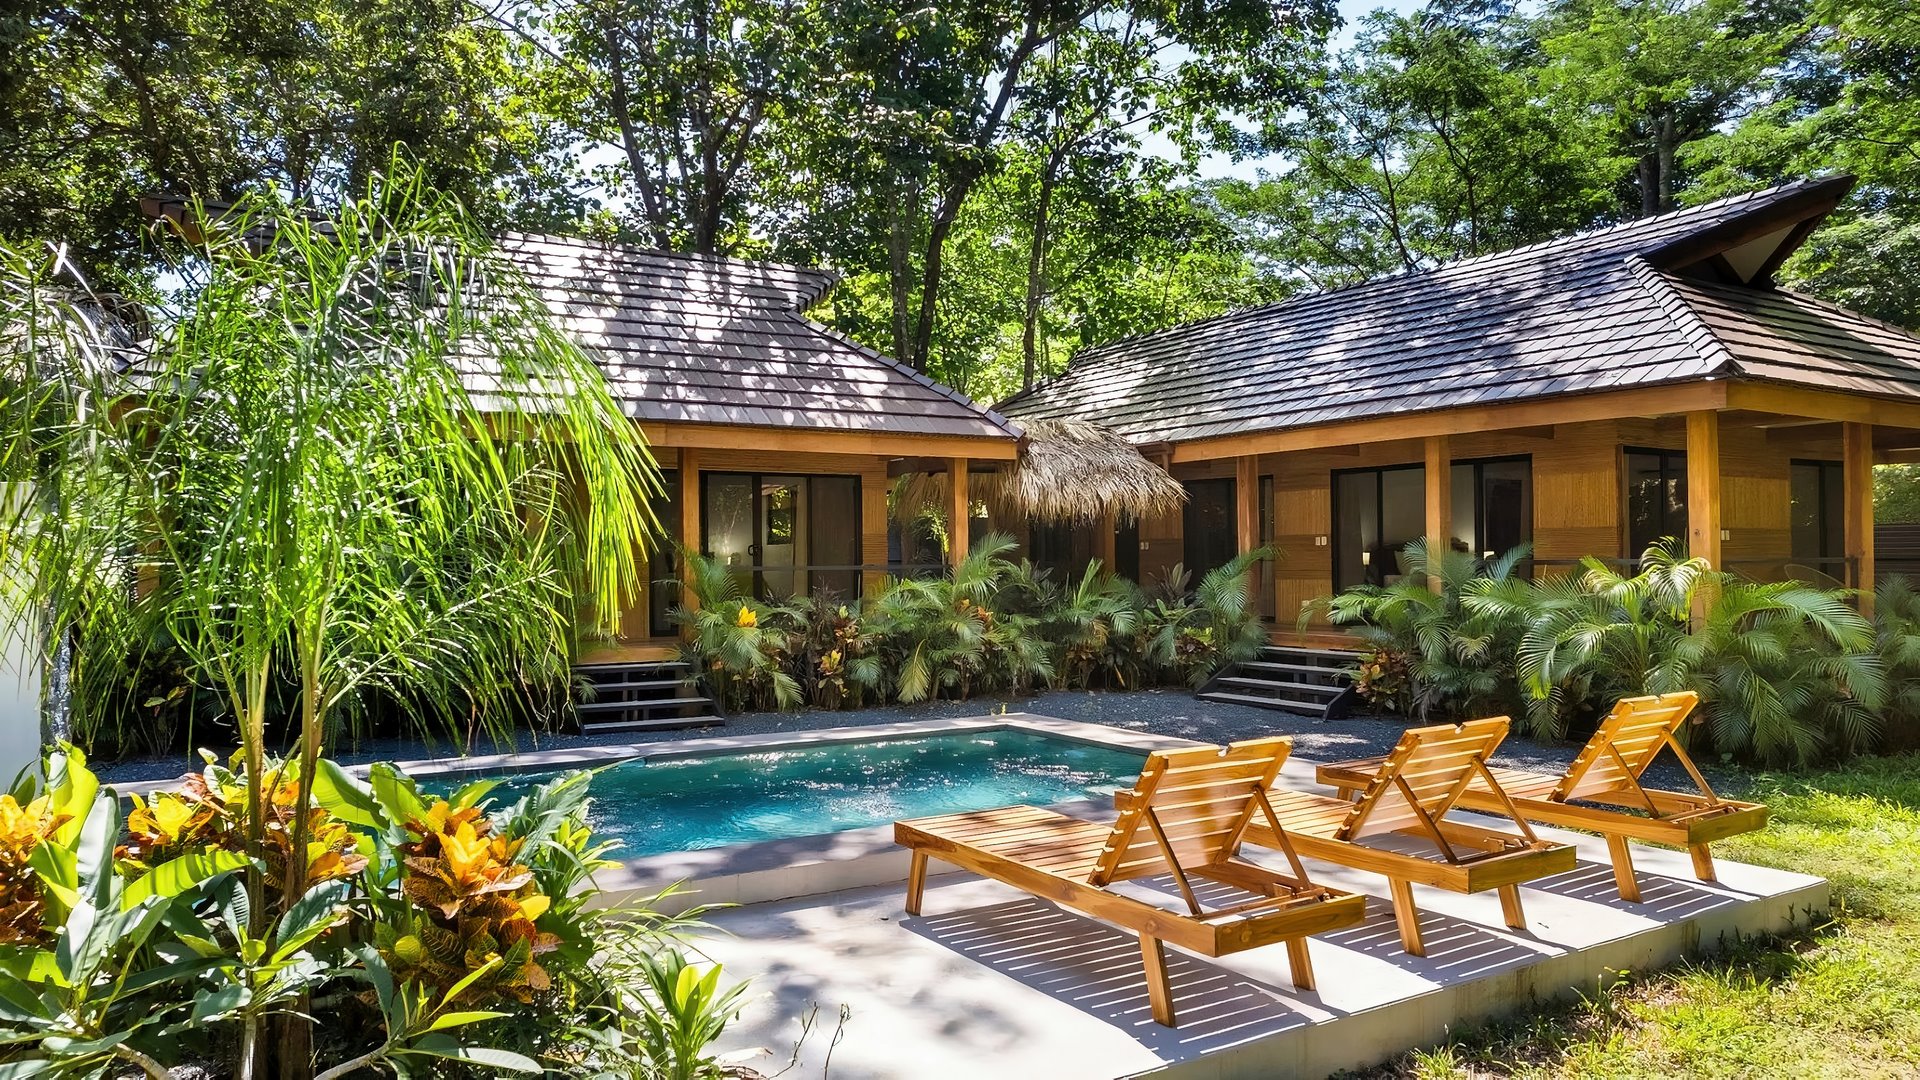 9954-The balinese-style home for sale close to Avellanas beach, Costa Rica